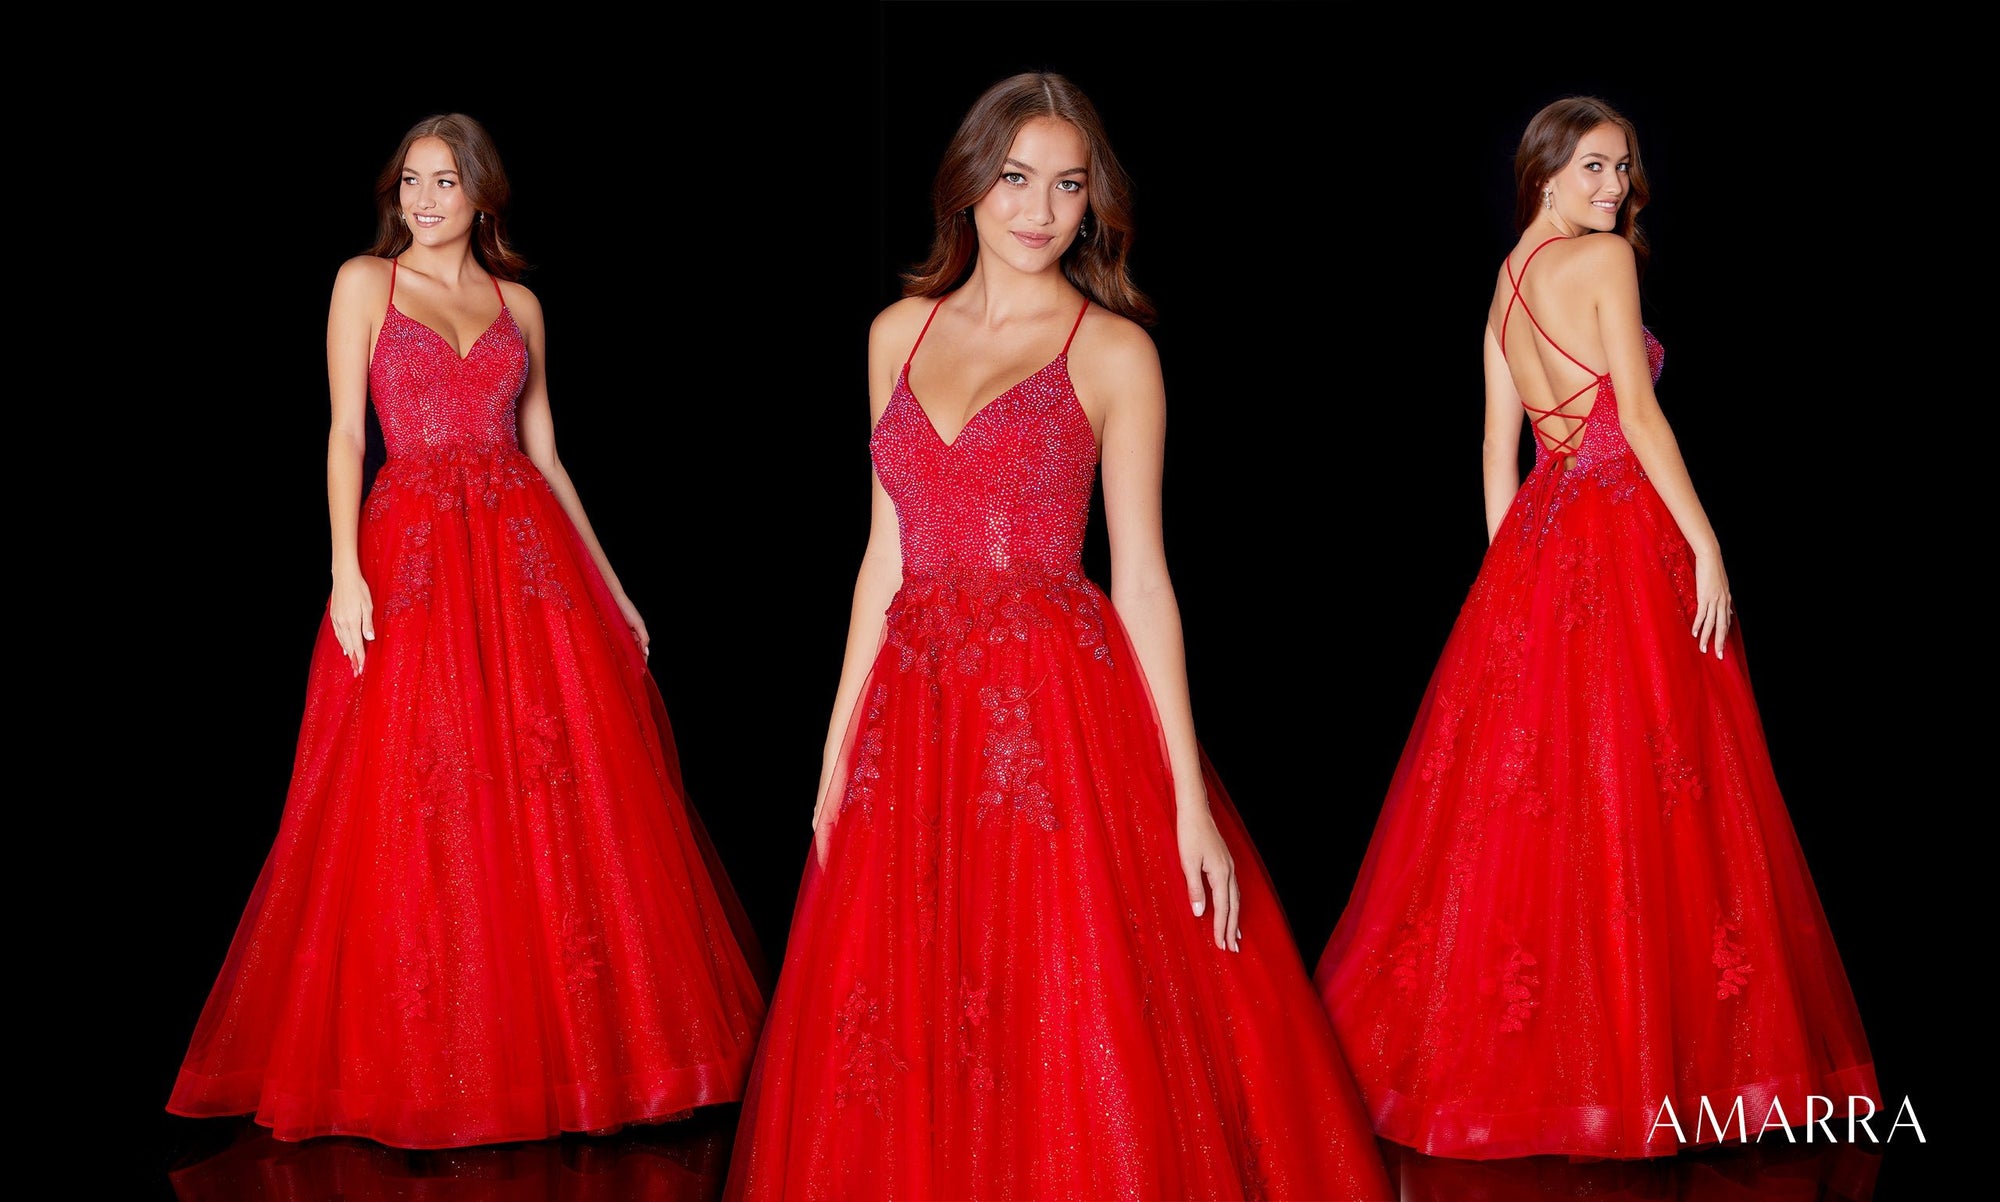 Captivating Enchantment: Choosing the Perfect Ball Gown Prom Dress for Your Fairy-Tale Night